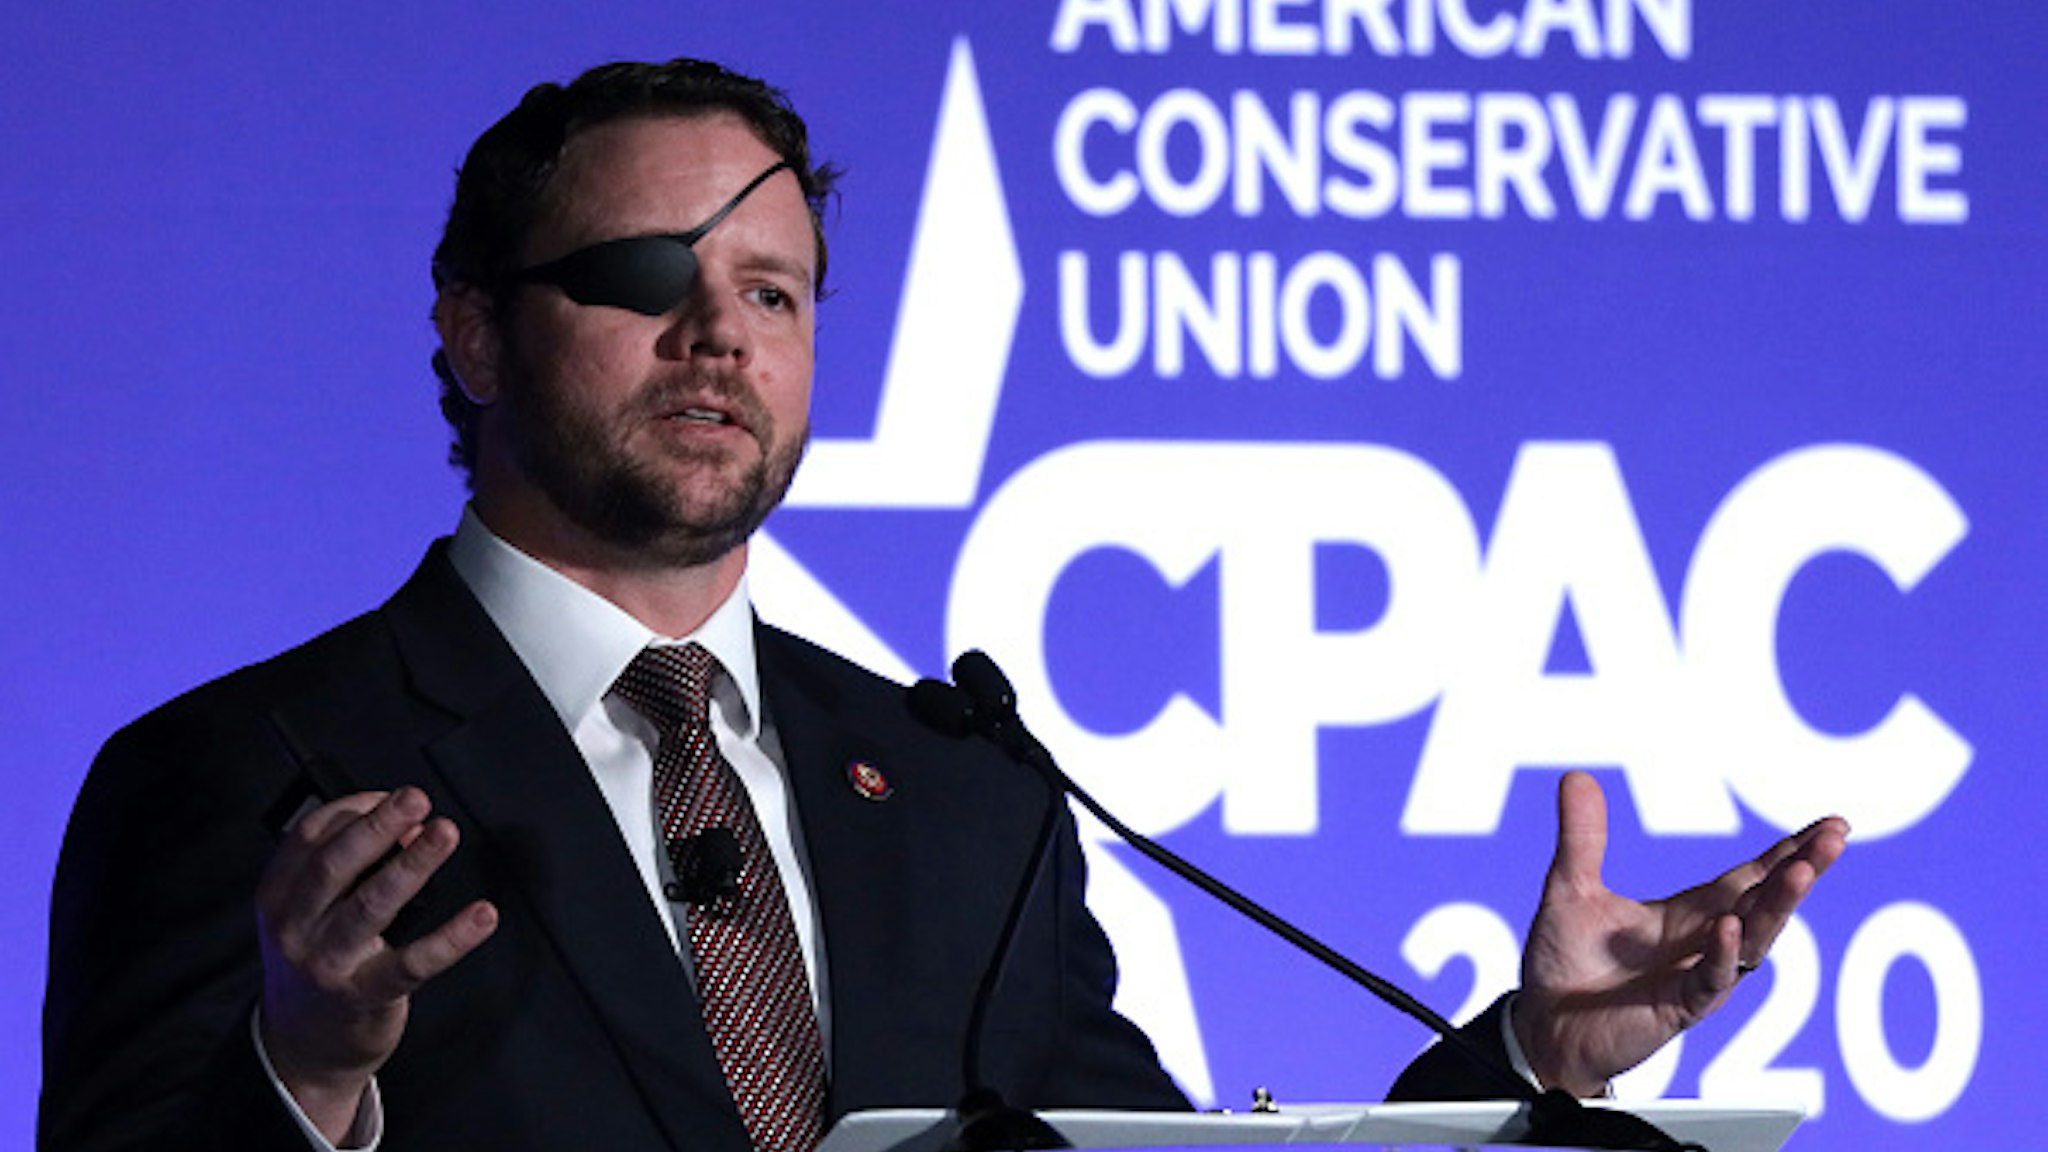 NATIONAL HARBOR, MARYLAND - FEBRUARY 26: U.S. Rep. Dan Crenshaw (R-TX) speaks on “The Fate of Our Culture and Our Nation Hangs in the Balance” during the CPAC Direct Action Training at the annual Conservative Political Action Conference at Gaylord National Resort &amp; Convention Center February 26, 2020 in National Harbor, Maryland. U.S. President Donald Trump is expected to address the annual event on February 29th.